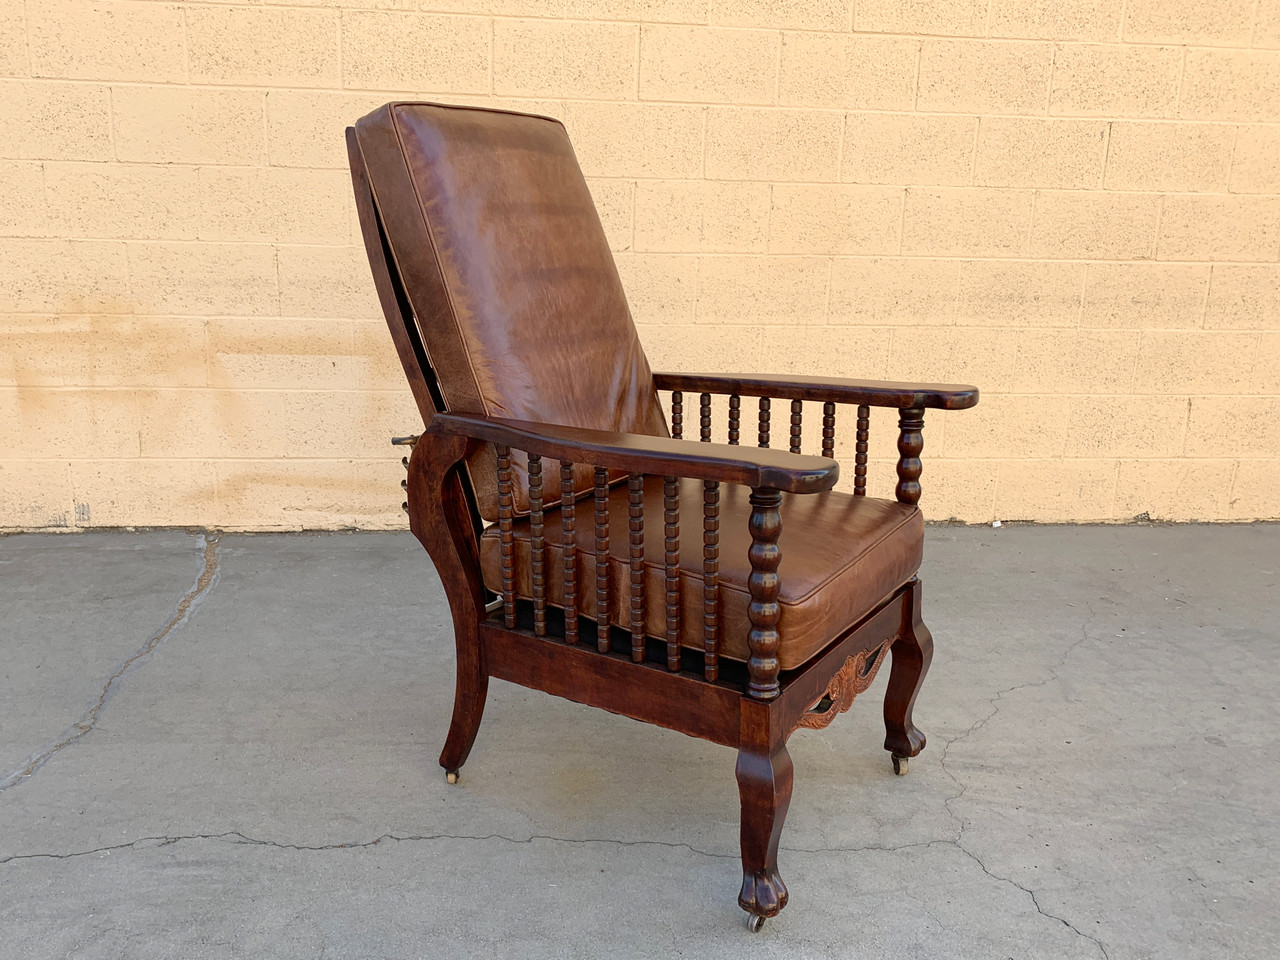 Original Antique Morris Reclining Chair with Reversible